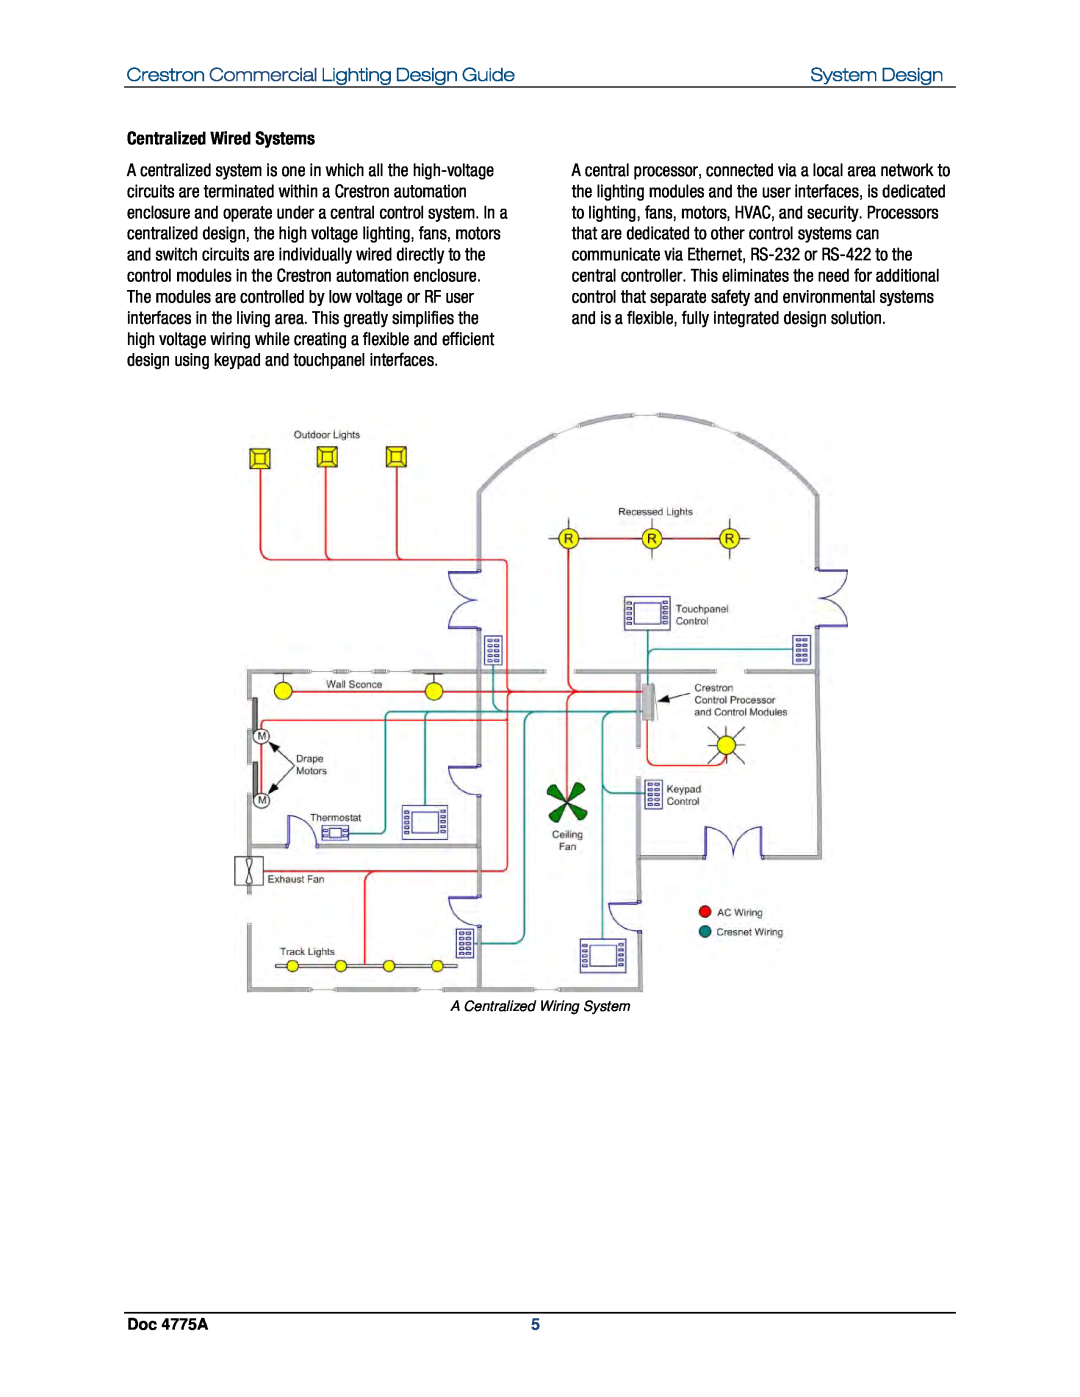 Crestron electronic GLPS-HSW, IPAC-GL1 Centralized Wired Systems, Crestron Commercial Lighting Design Guide, System Design 